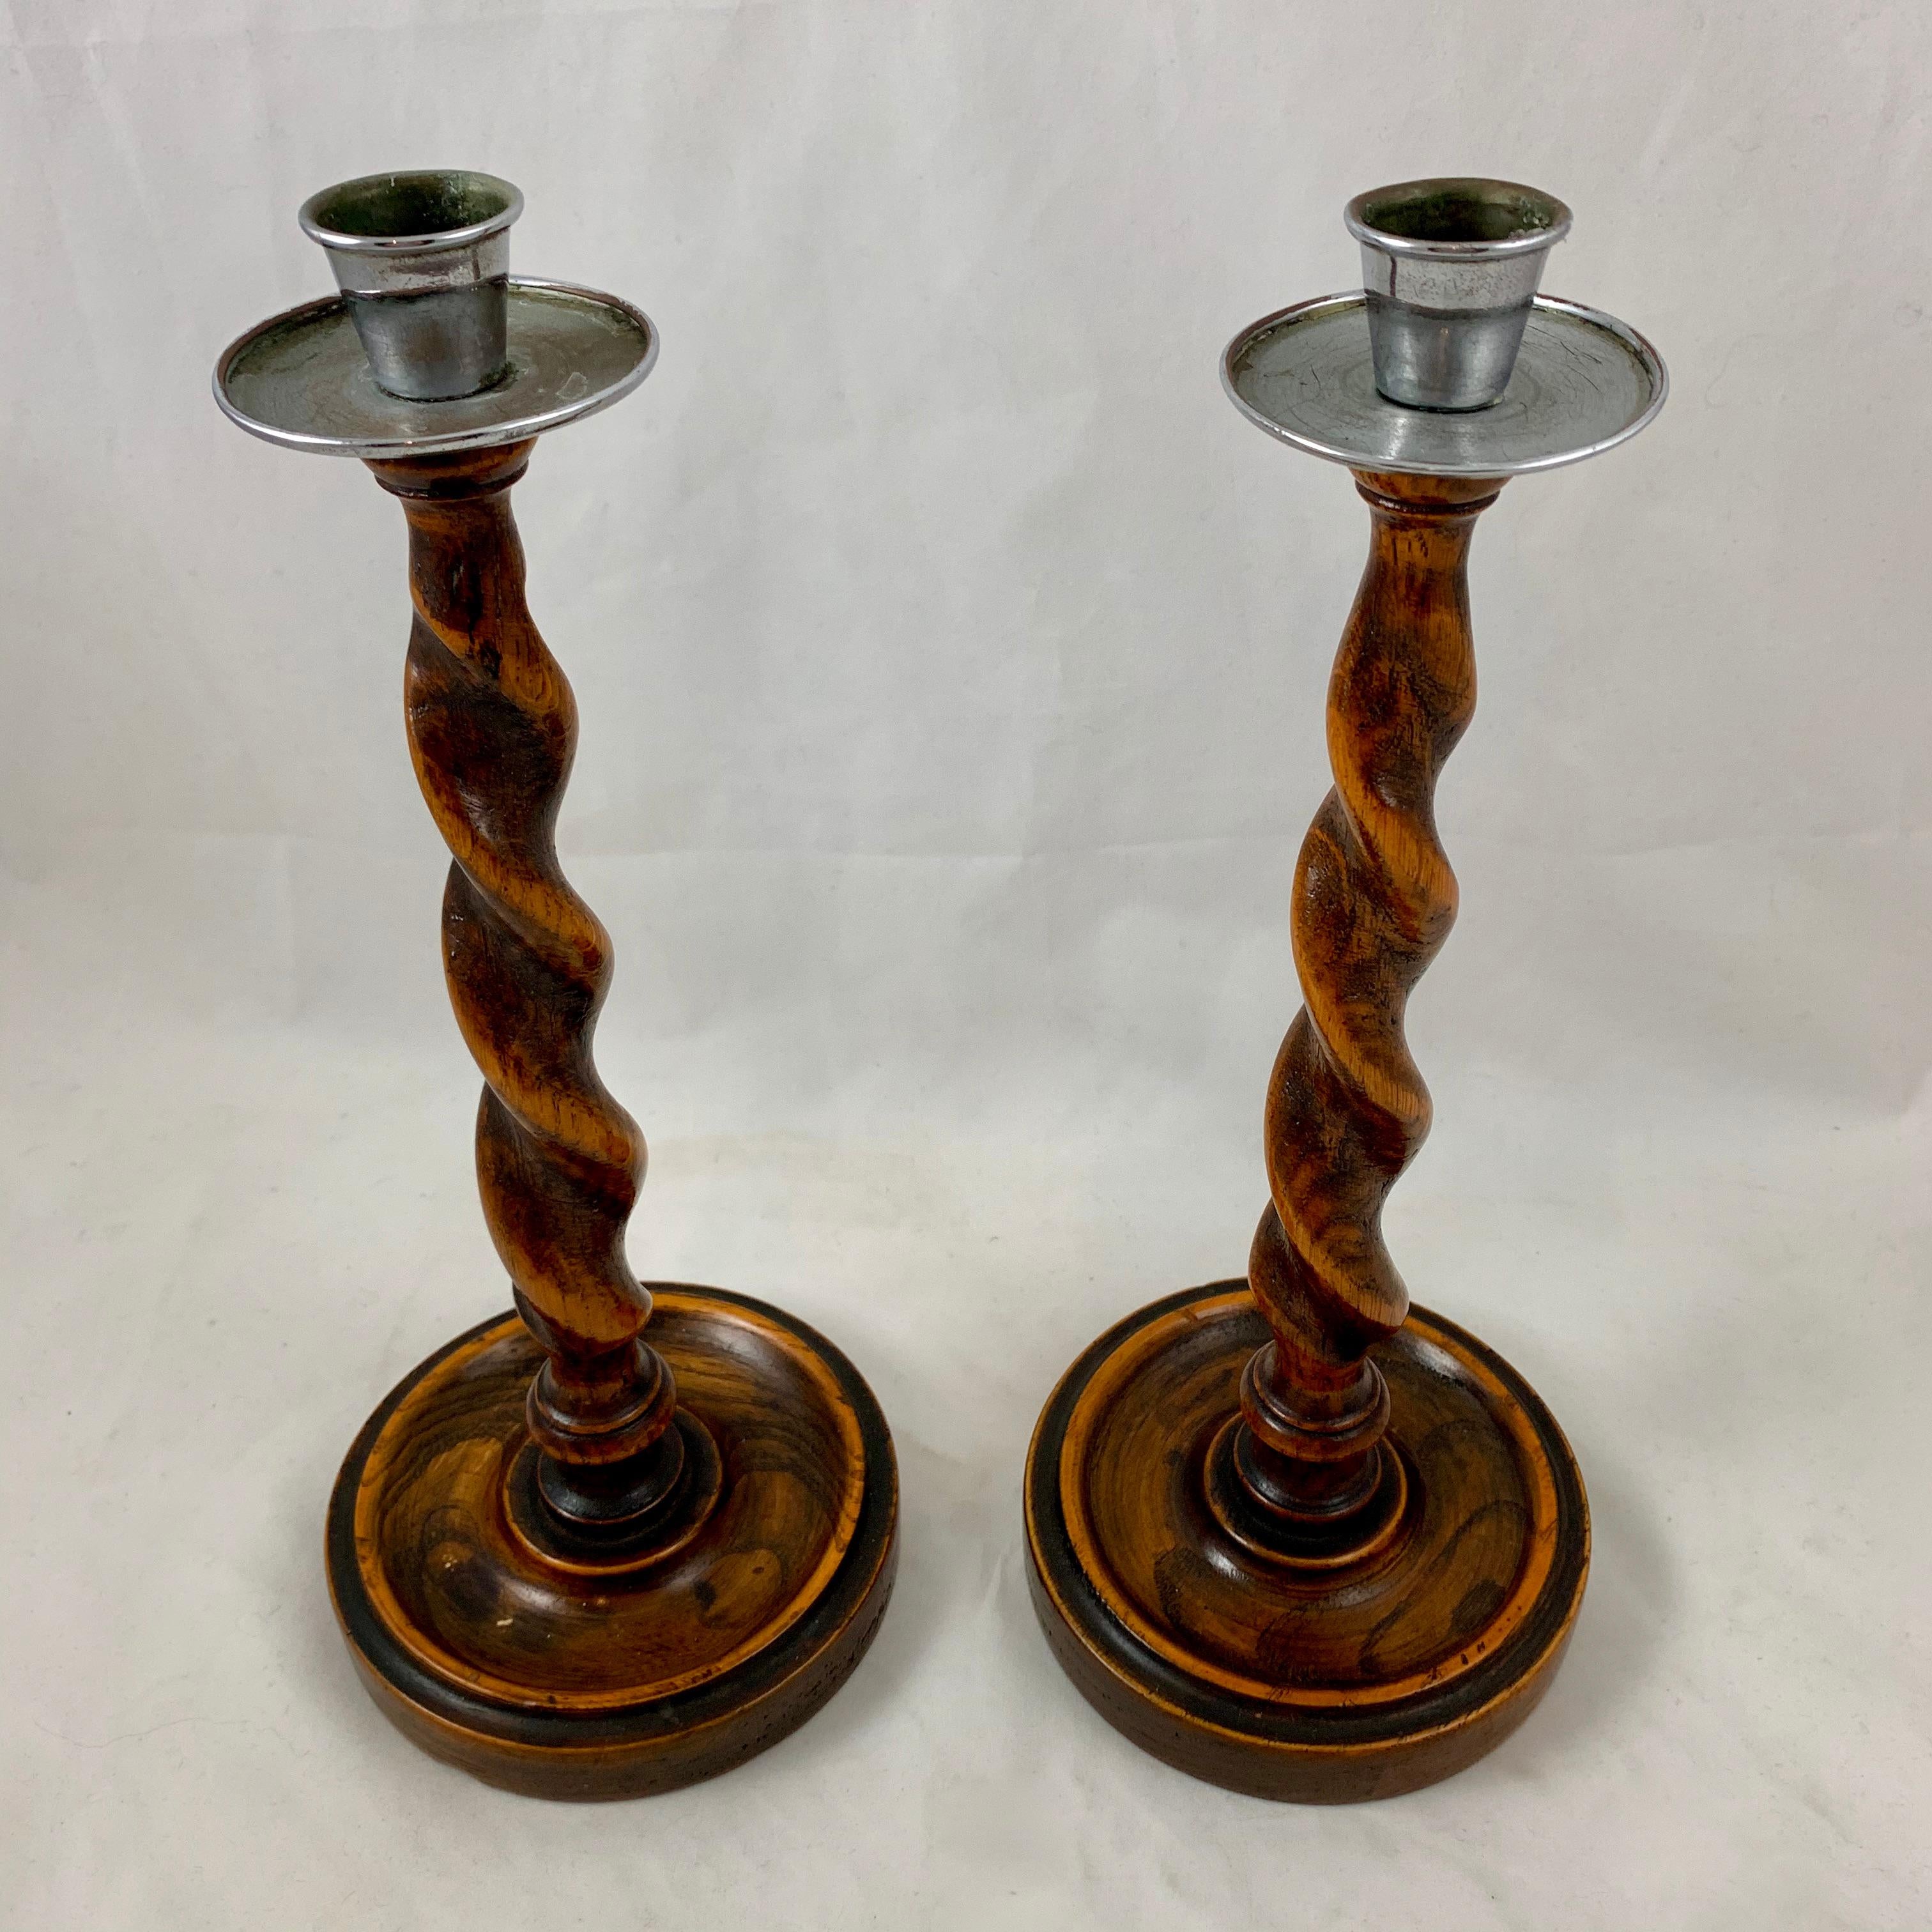 A pair of Barley-Twist oak and pewter topped candlesticks, England, circa 1890-1900.

The Barley-Twist form is based on a twisted stick of barley sugar and was popular in England for making candlesticks and furniture. It is inspired by the